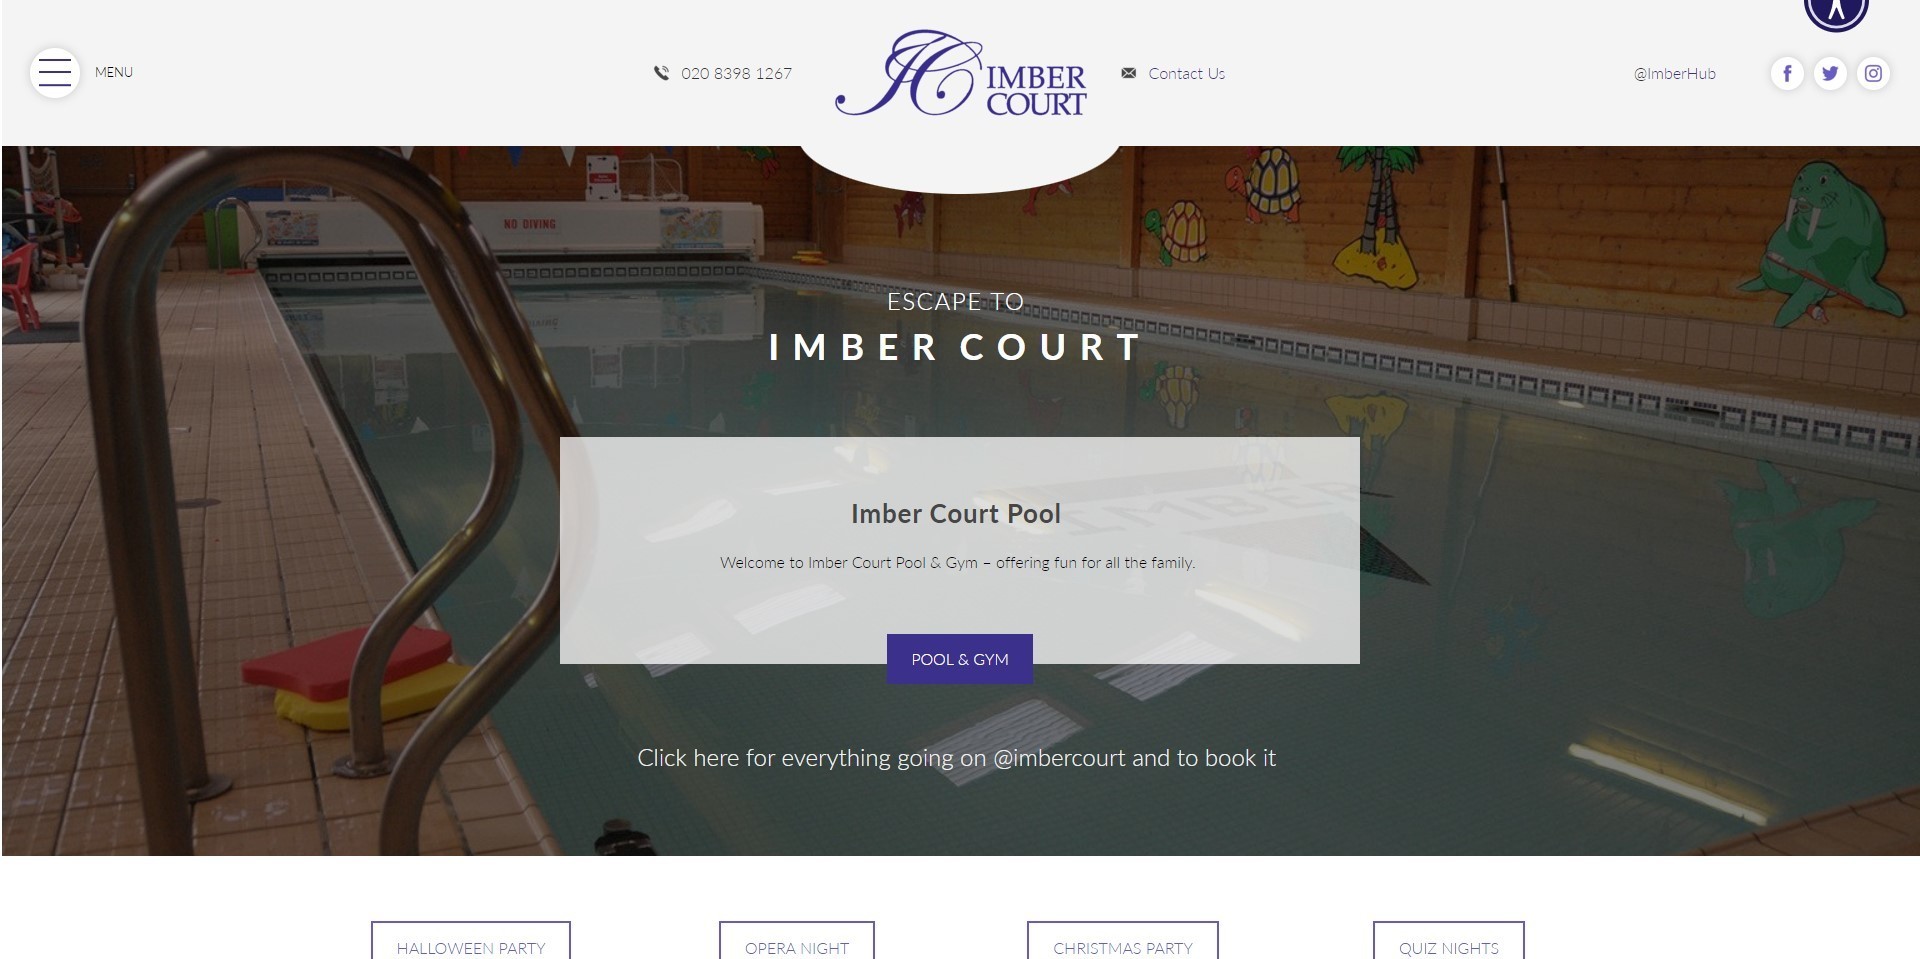 The new Imber Court website, designed by it'seeze, shown on desktop